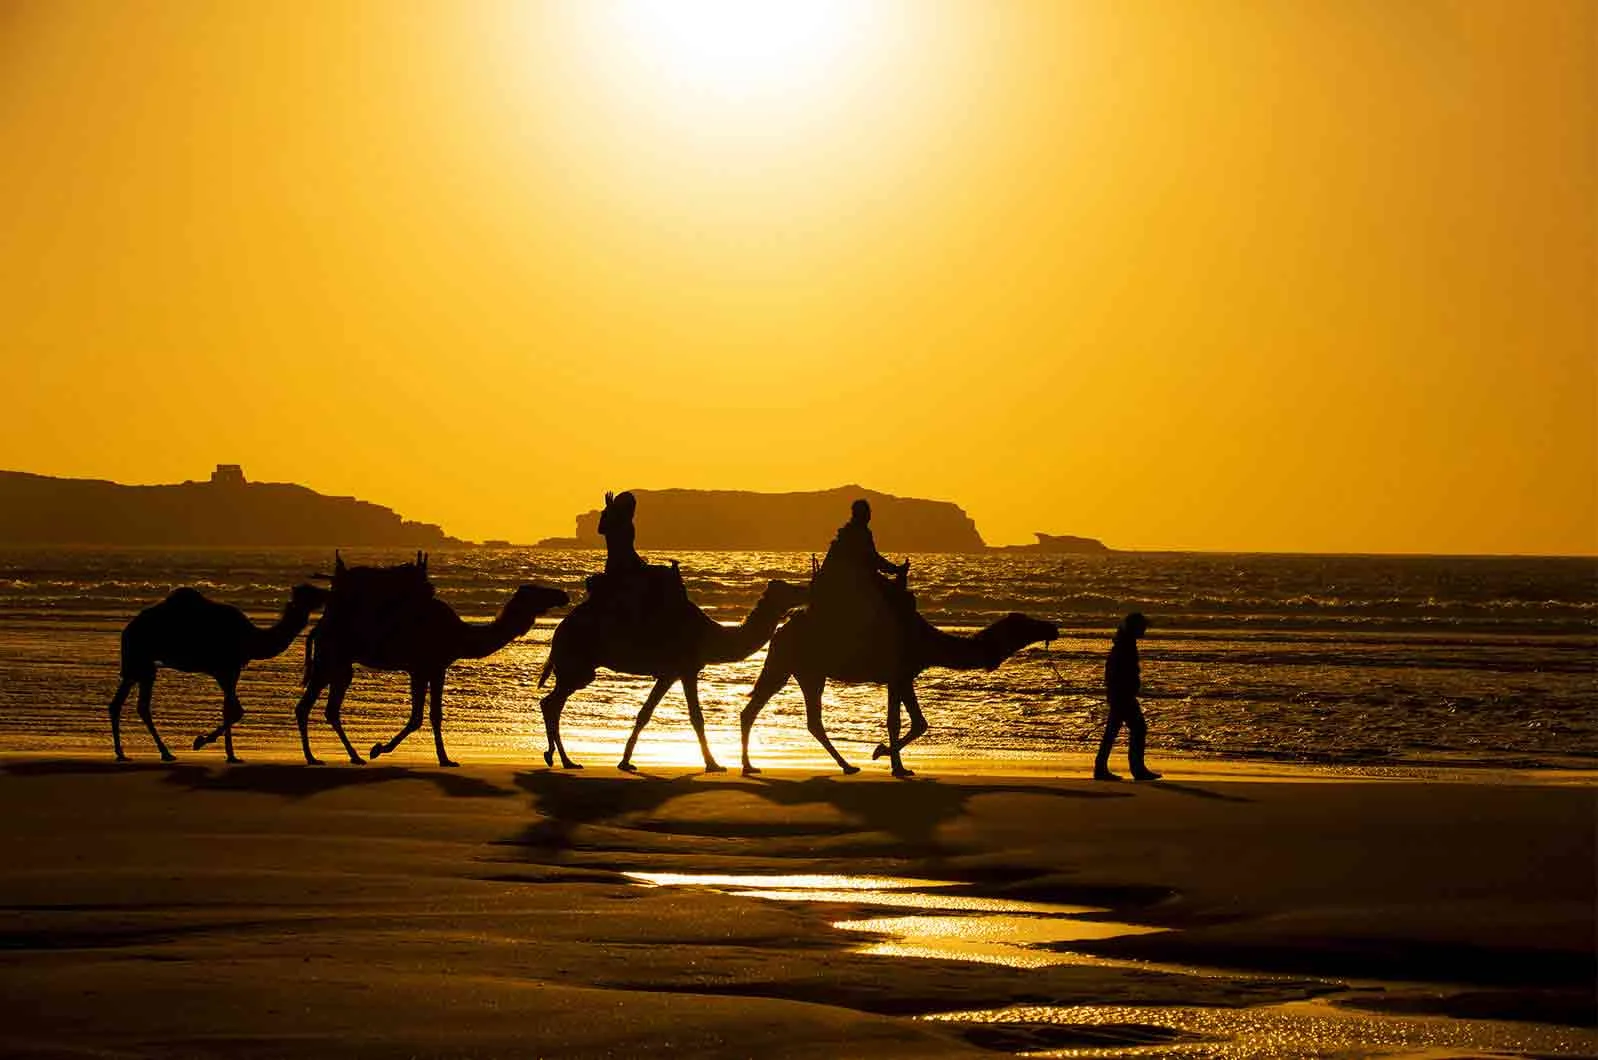 Three men, two of riding camels and one walking on the beach. Concept of Arabic language, culture and speakers.